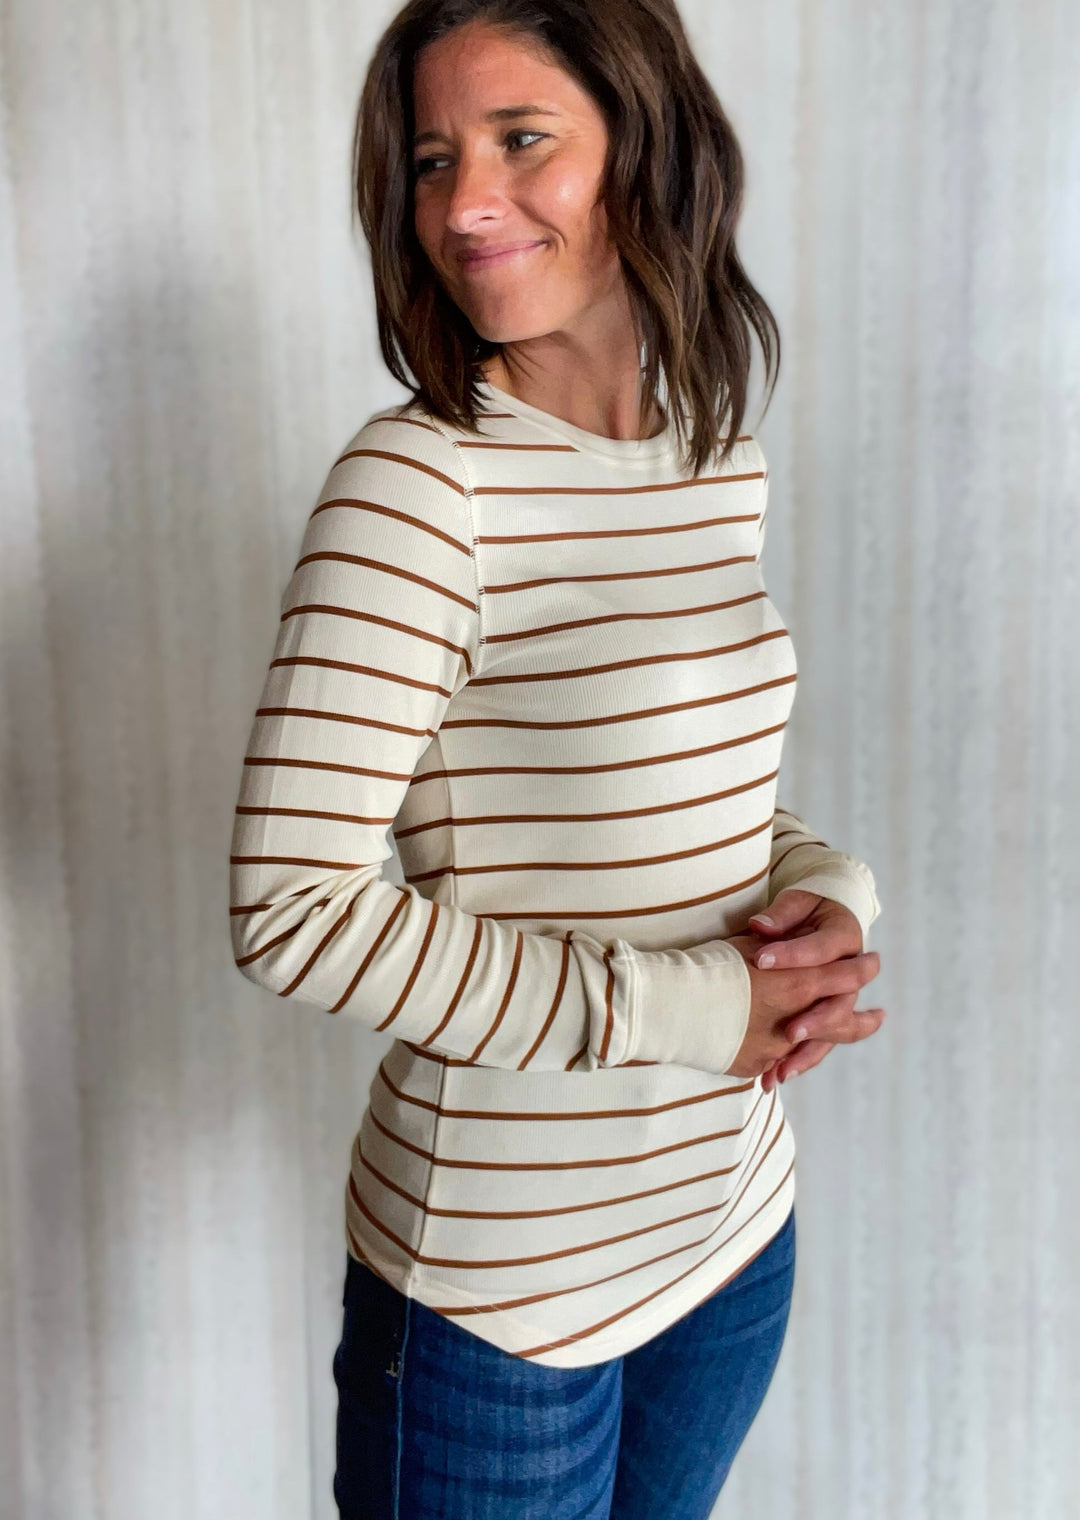 Striped Crew Neck Long Sleeve | Ribbed Long Sleeve | Cream & Camel Tan Long Sleeve Shirt by Thread & Supply sold at Embolden based out of Central Illinois